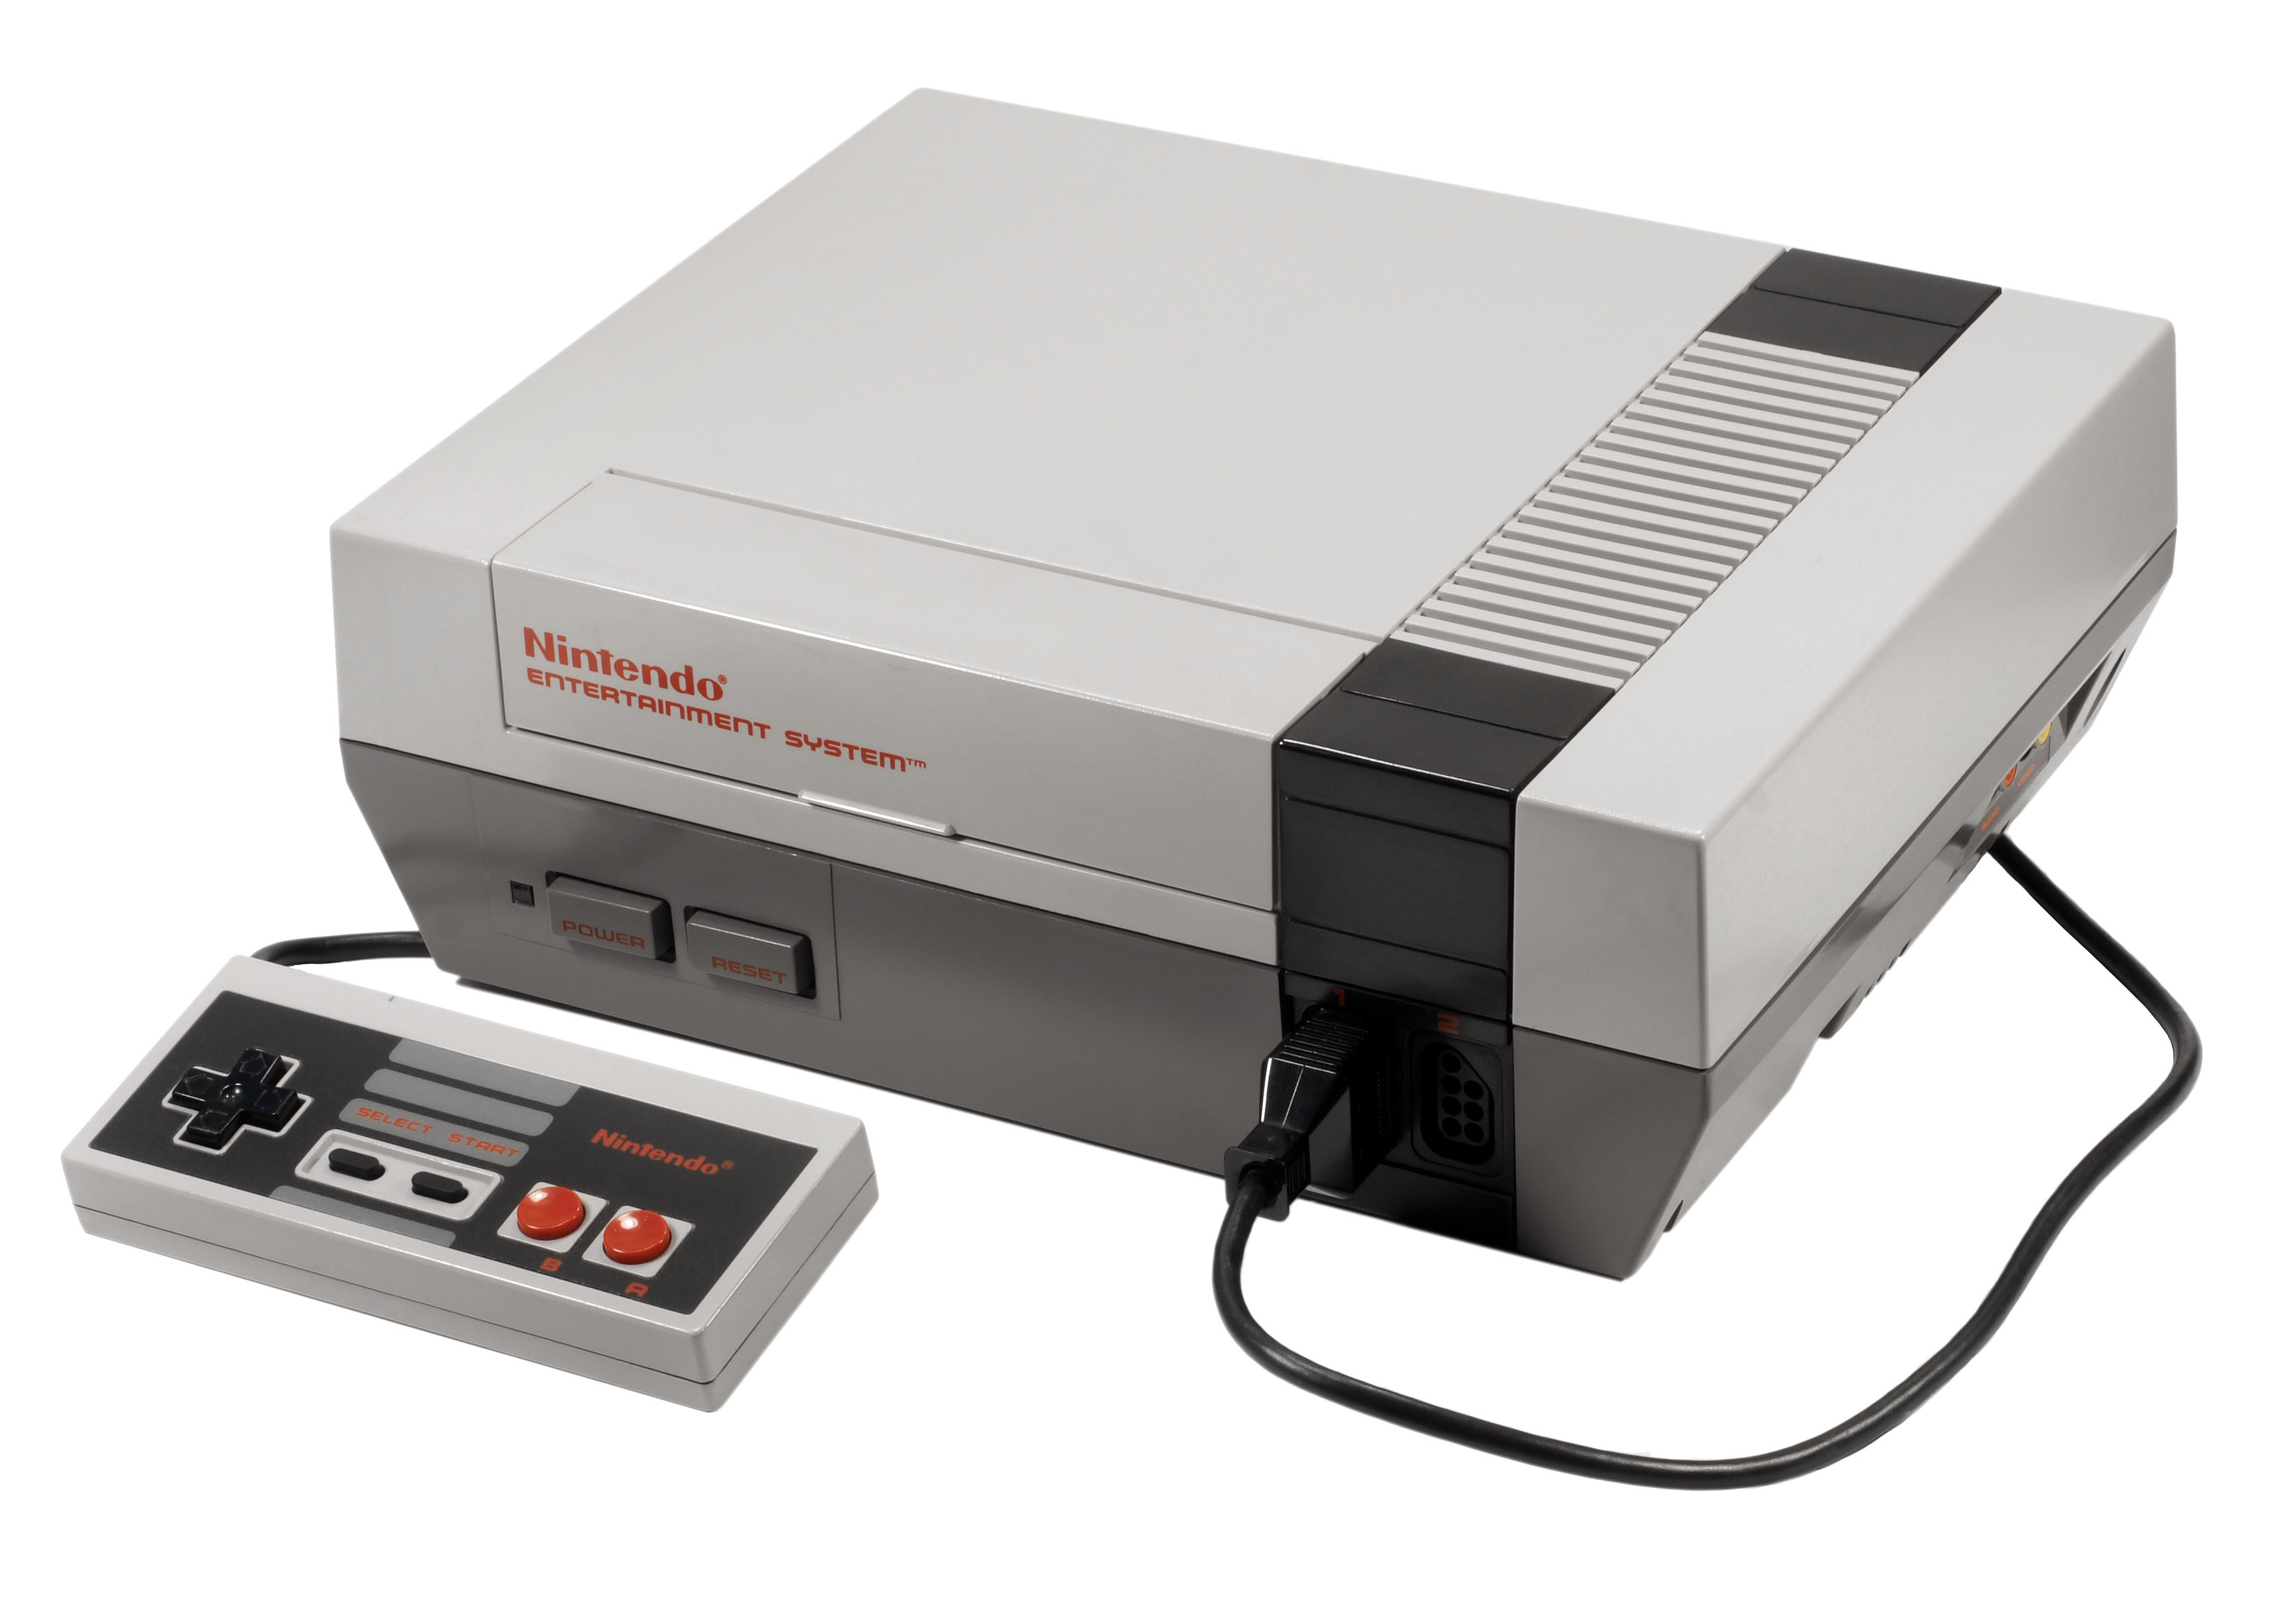 video game, nintendo entertainment system, consoles